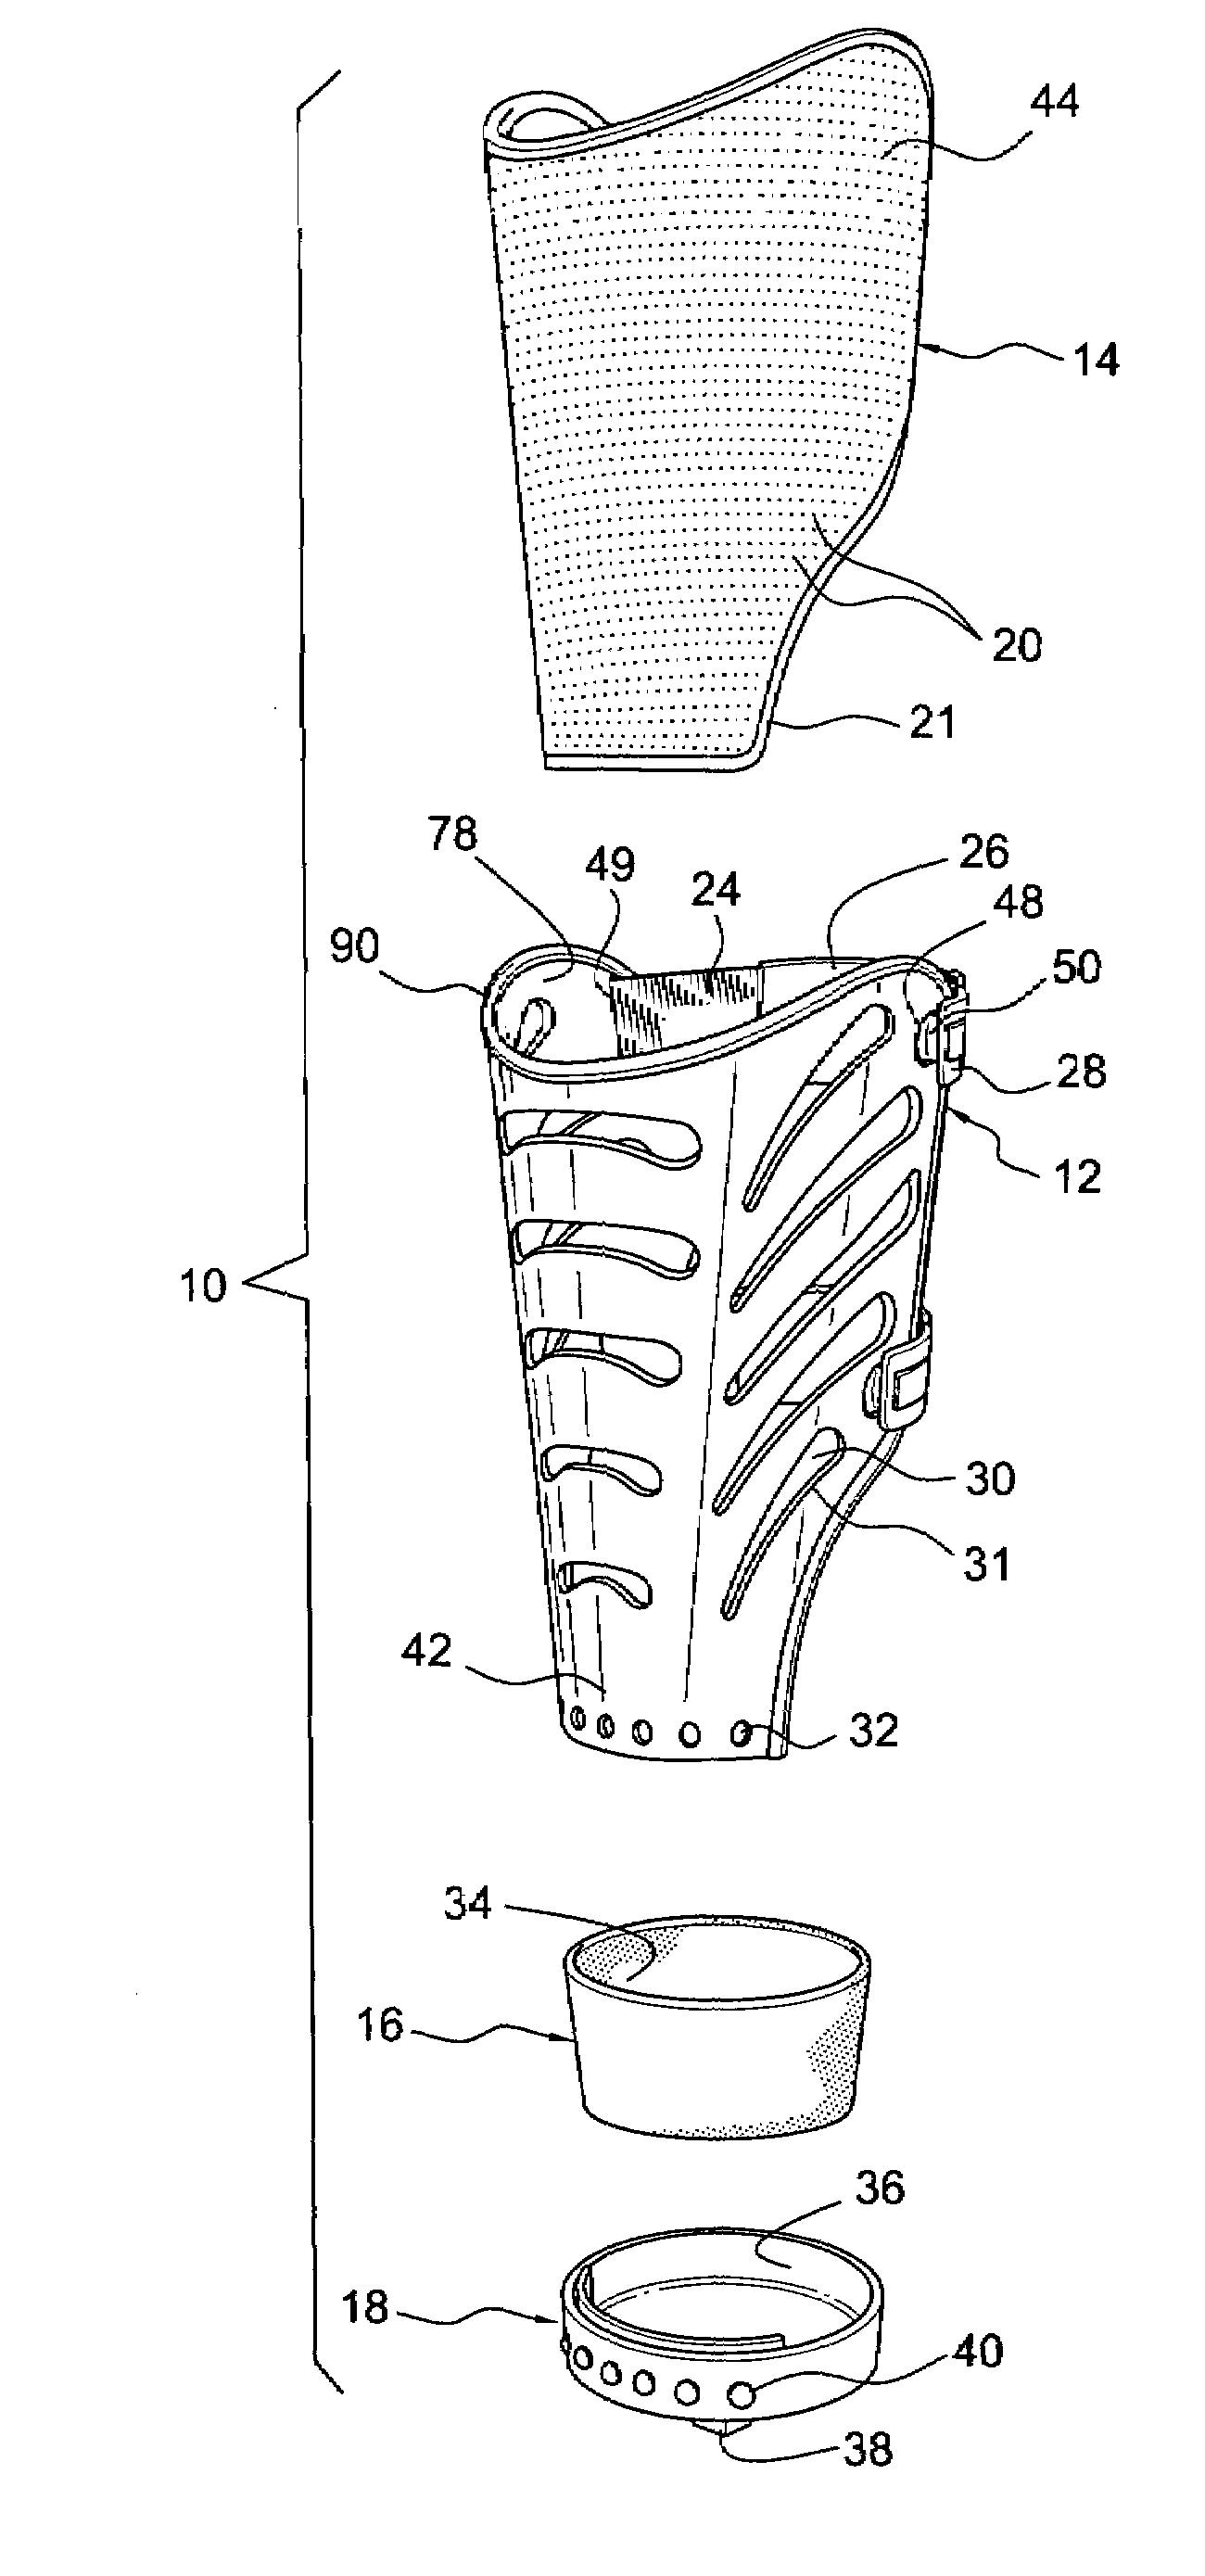 Ventilated prosthesis system